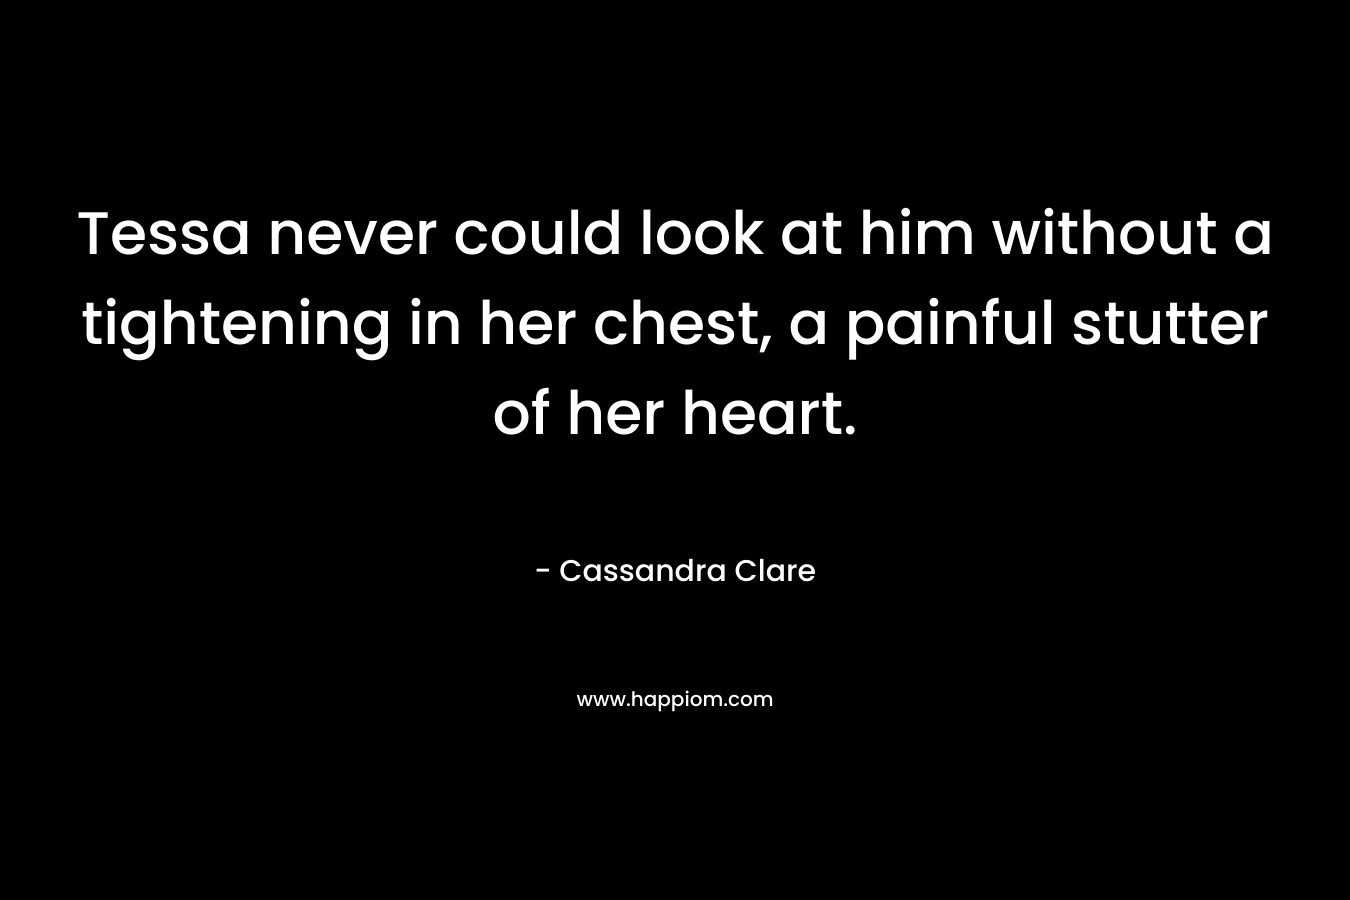 Tessa never could look at him without a tightening in her chest, a painful stutter of her heart. – Cassandra Clare